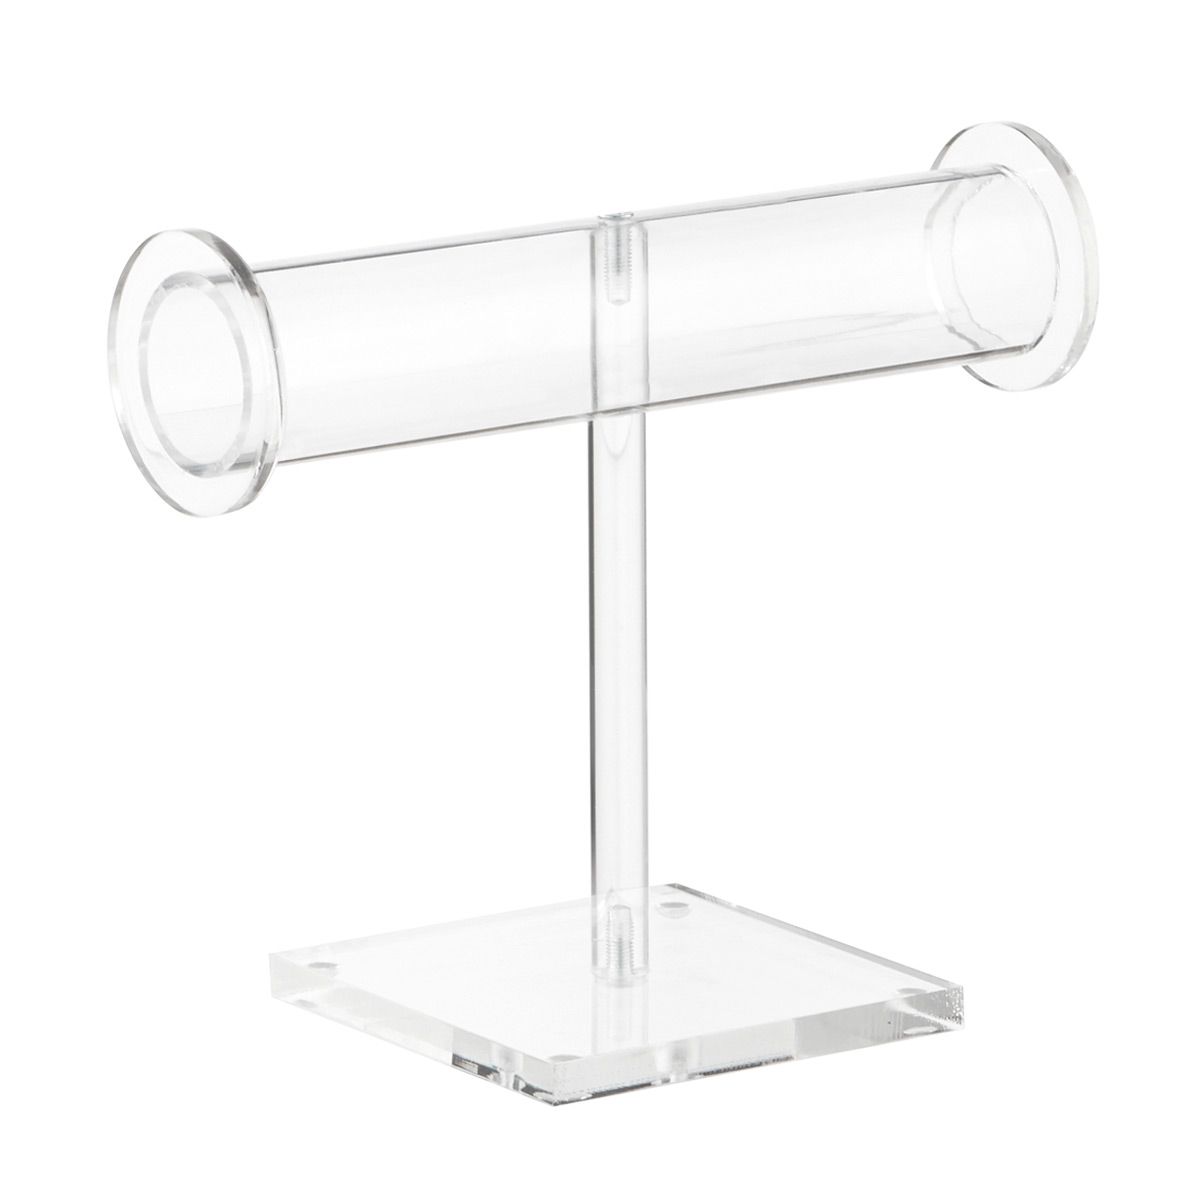 Acrylic Bracelet Stand | The Container Store